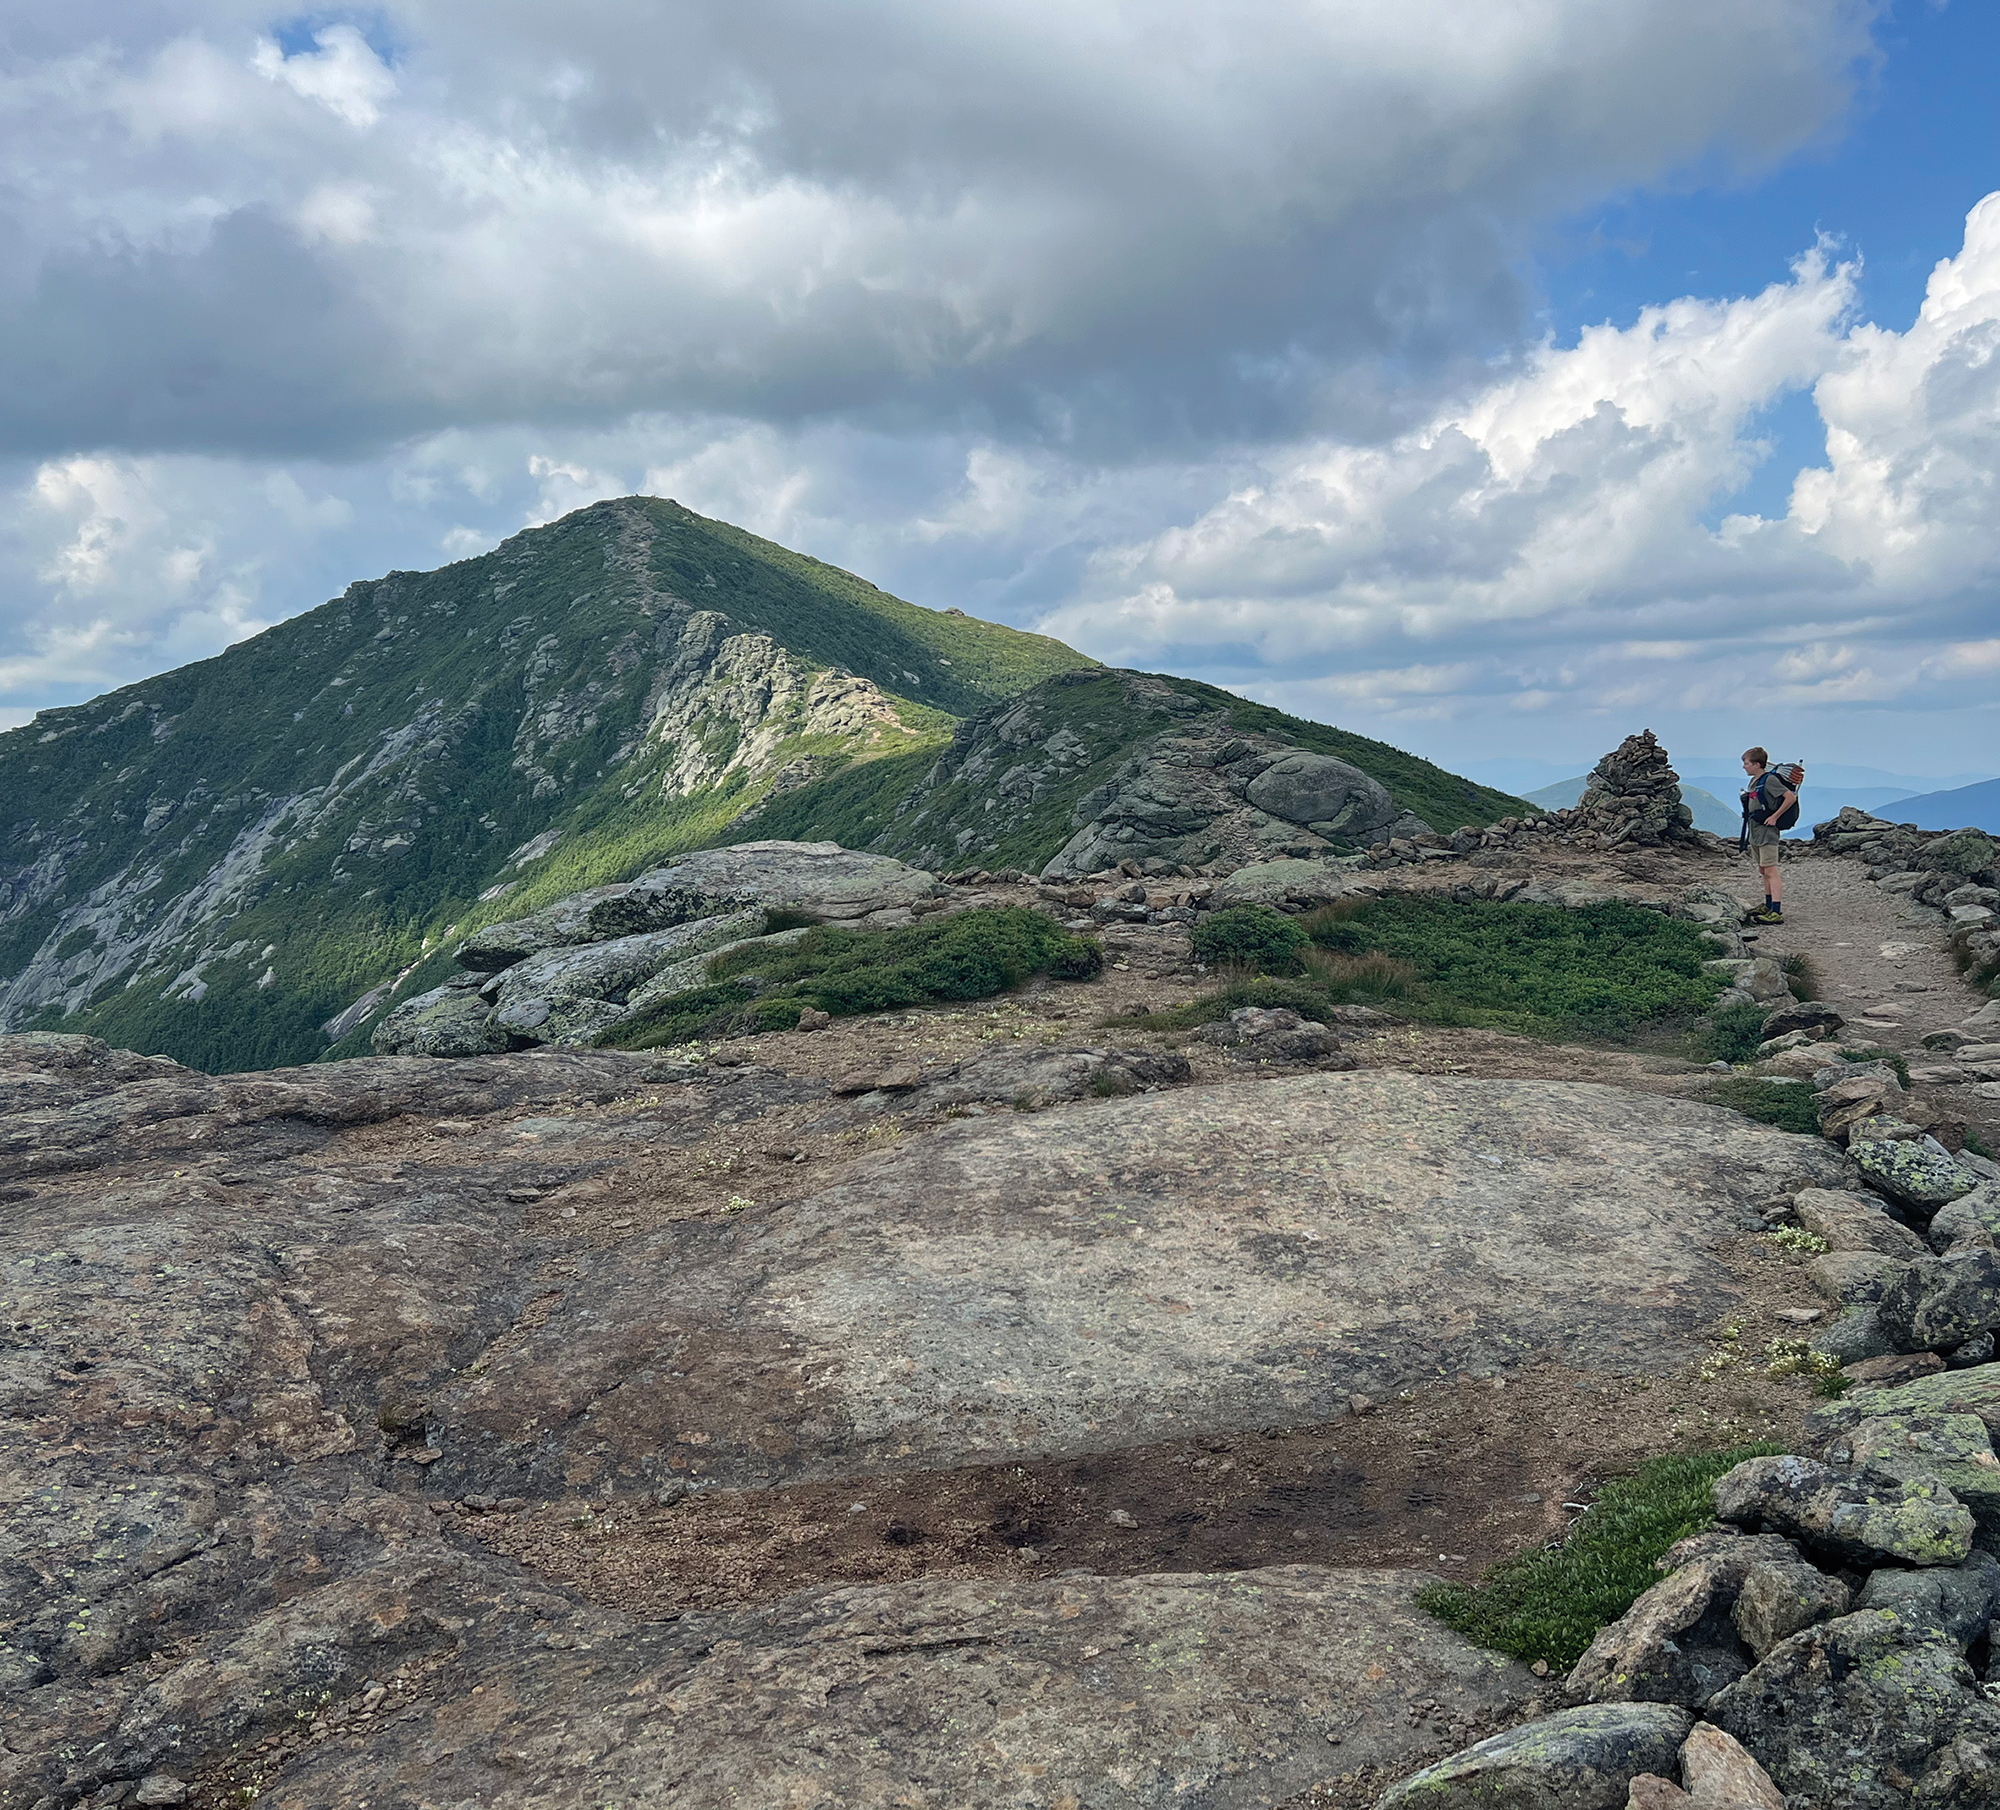 Photo of Mount Lafayette, New Hampshire, taken by Joni Skogman, North Star, one of 1,732 hikers who completed a recent thru-hike of the Appalachian Trail.